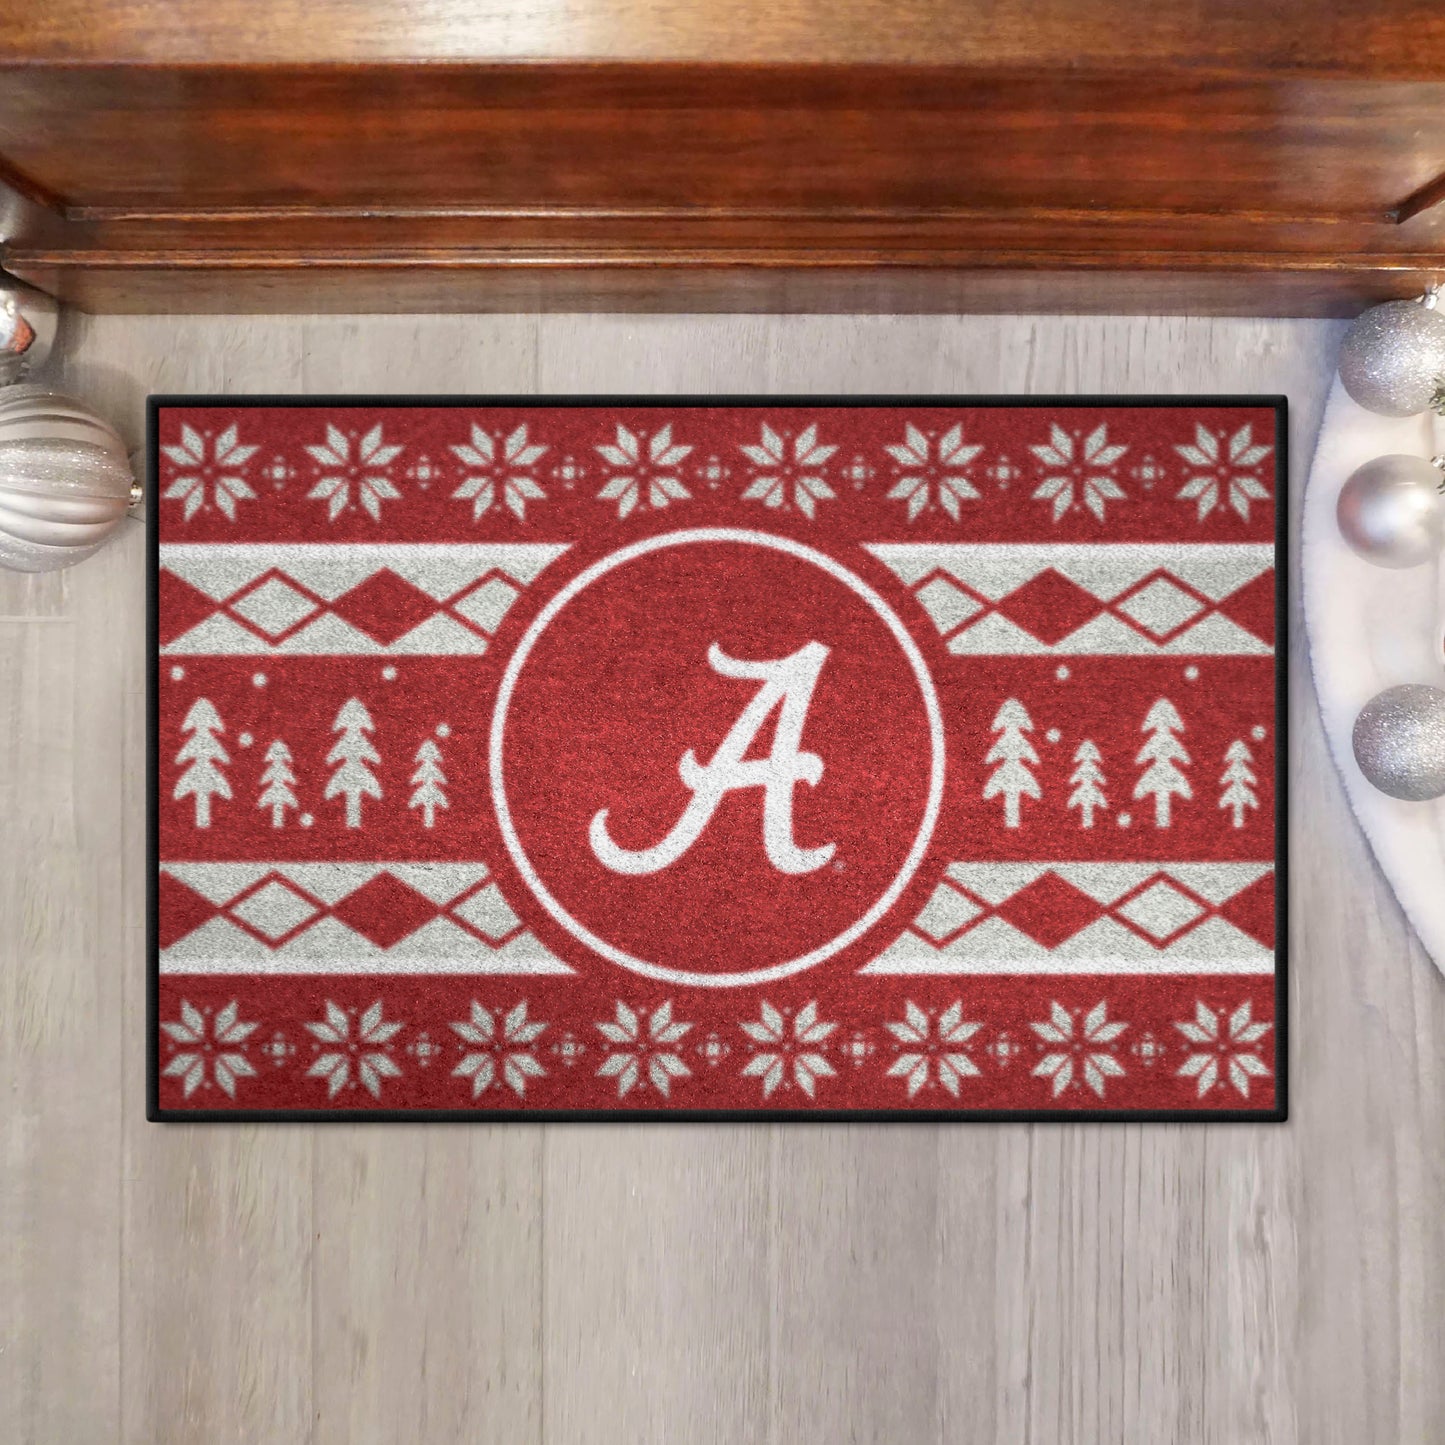 Alabama Crimson Tide Holiday Sweater Starter Mat Accent Rug - 19in. x 30in.